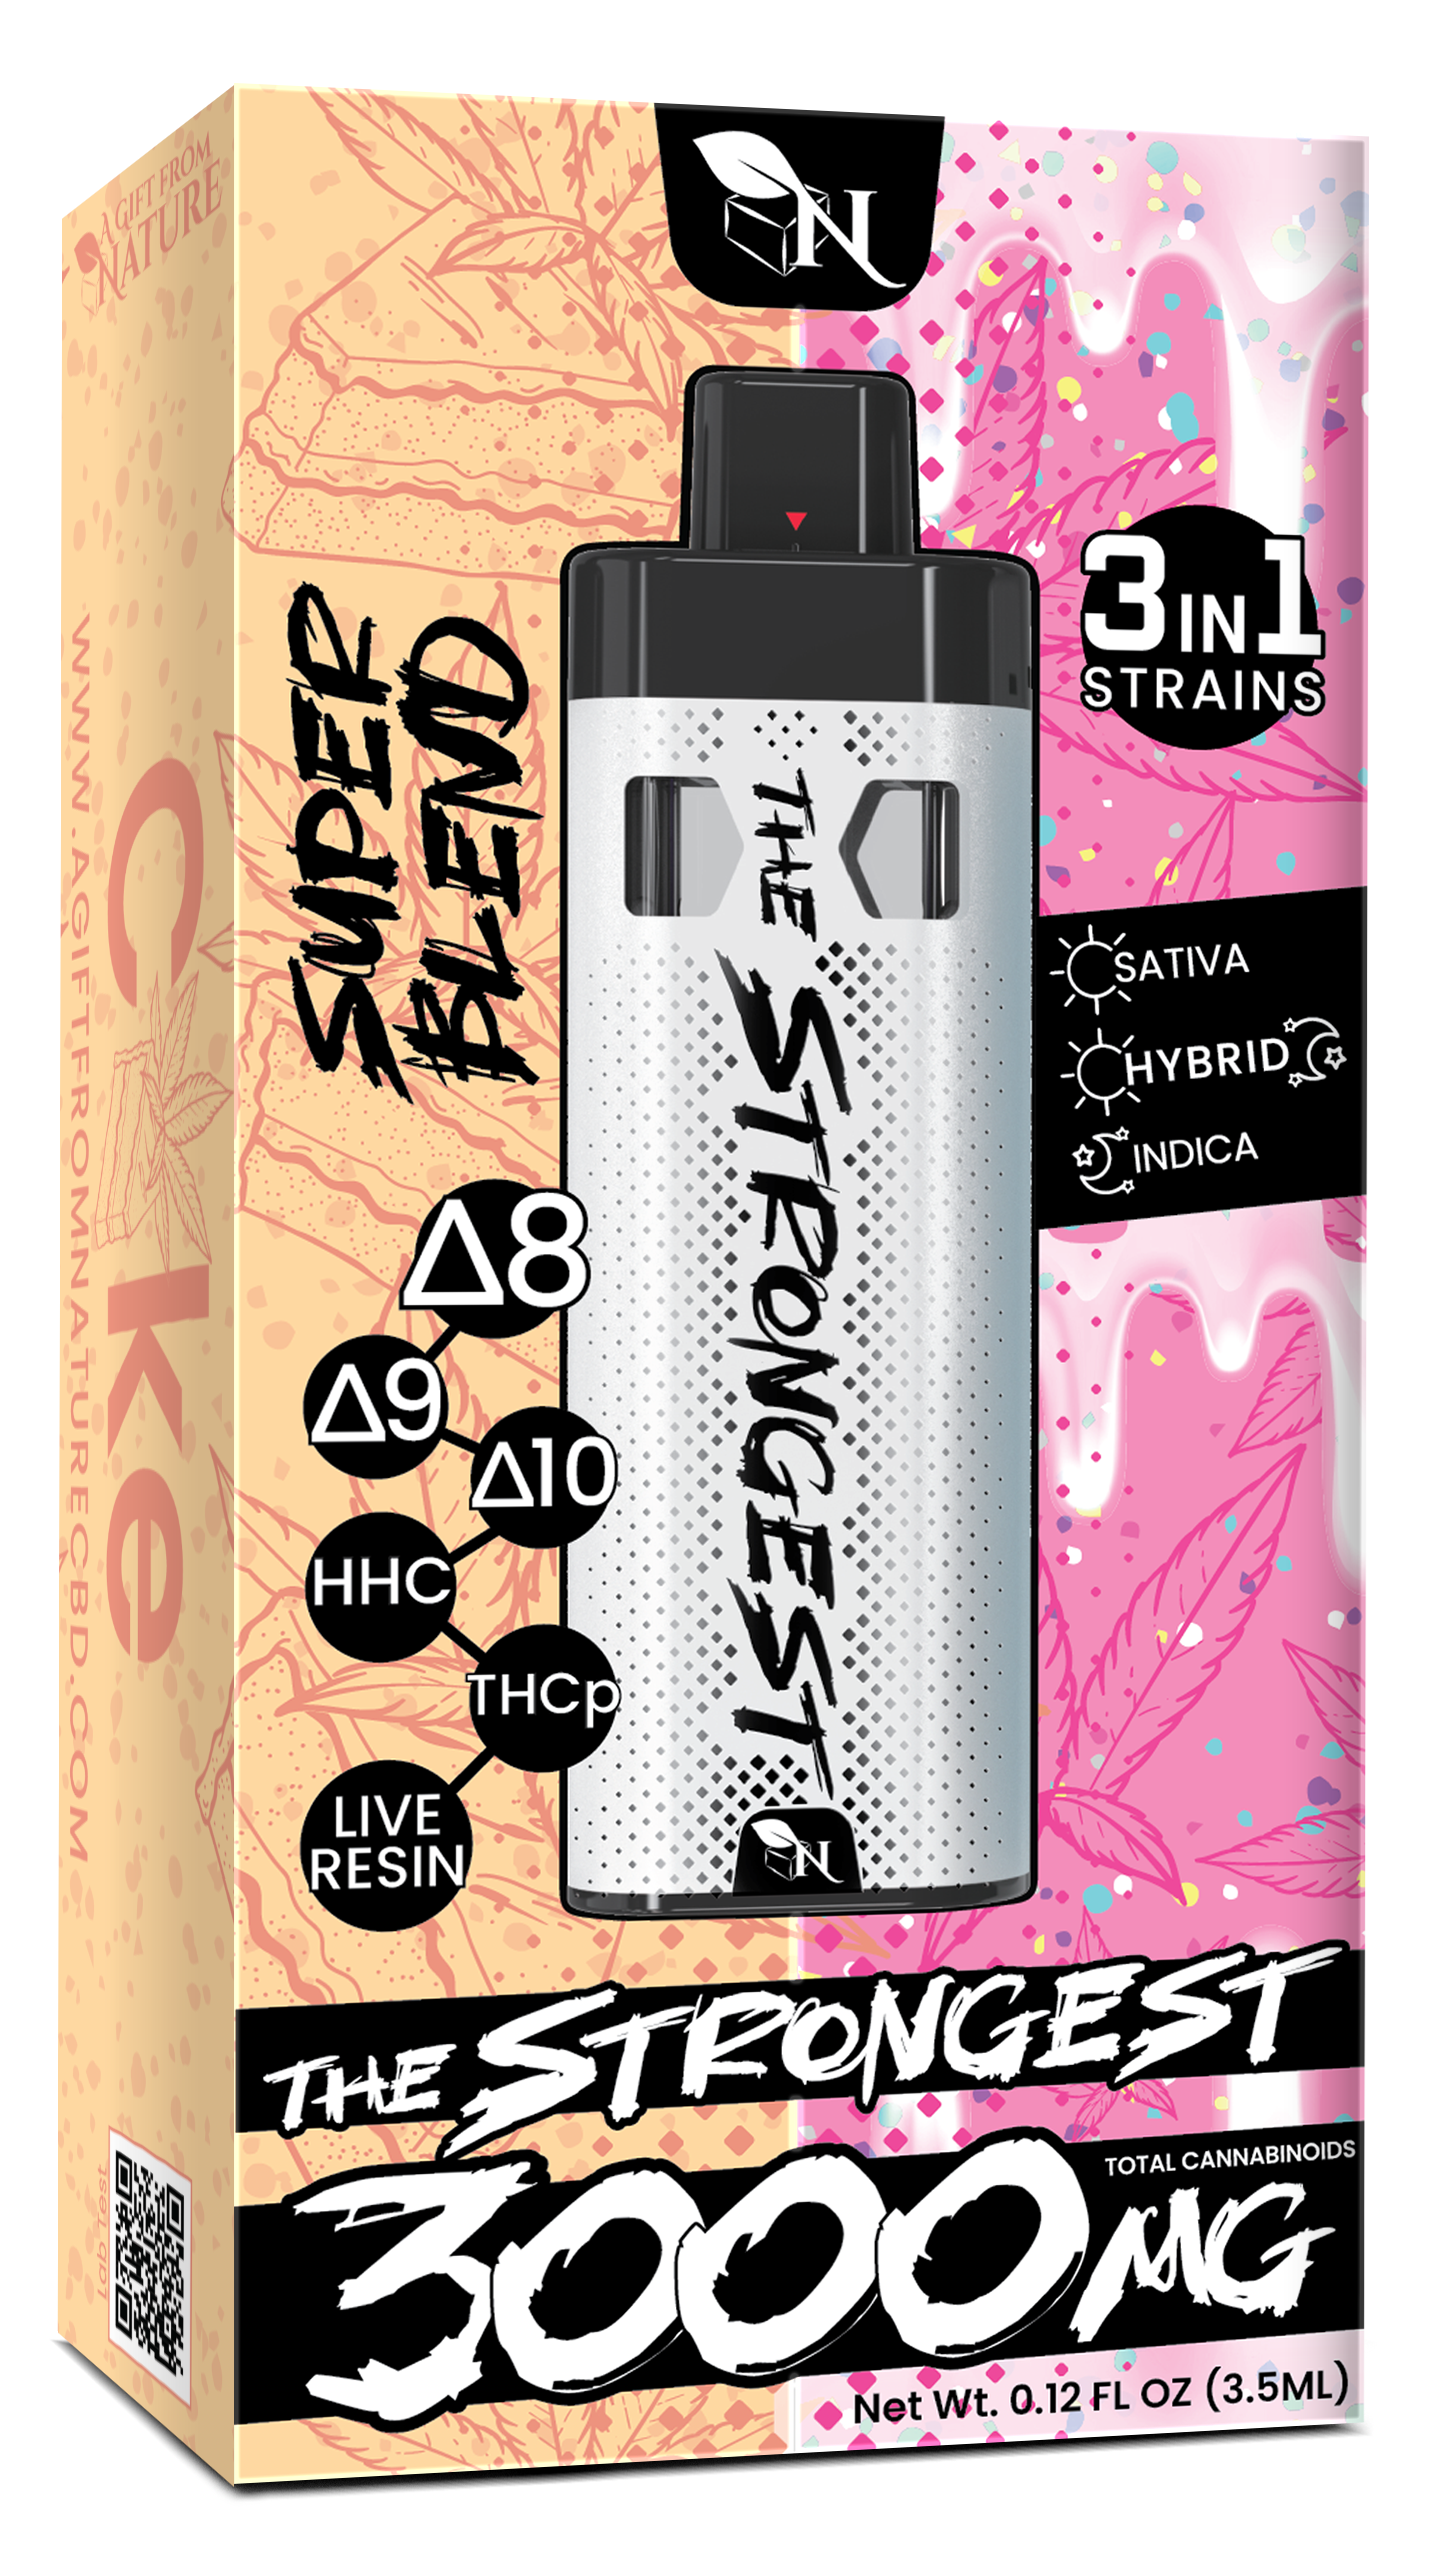 AGFN - The Strongest Super Blend THC 3ML Disposable I (Display of 5)